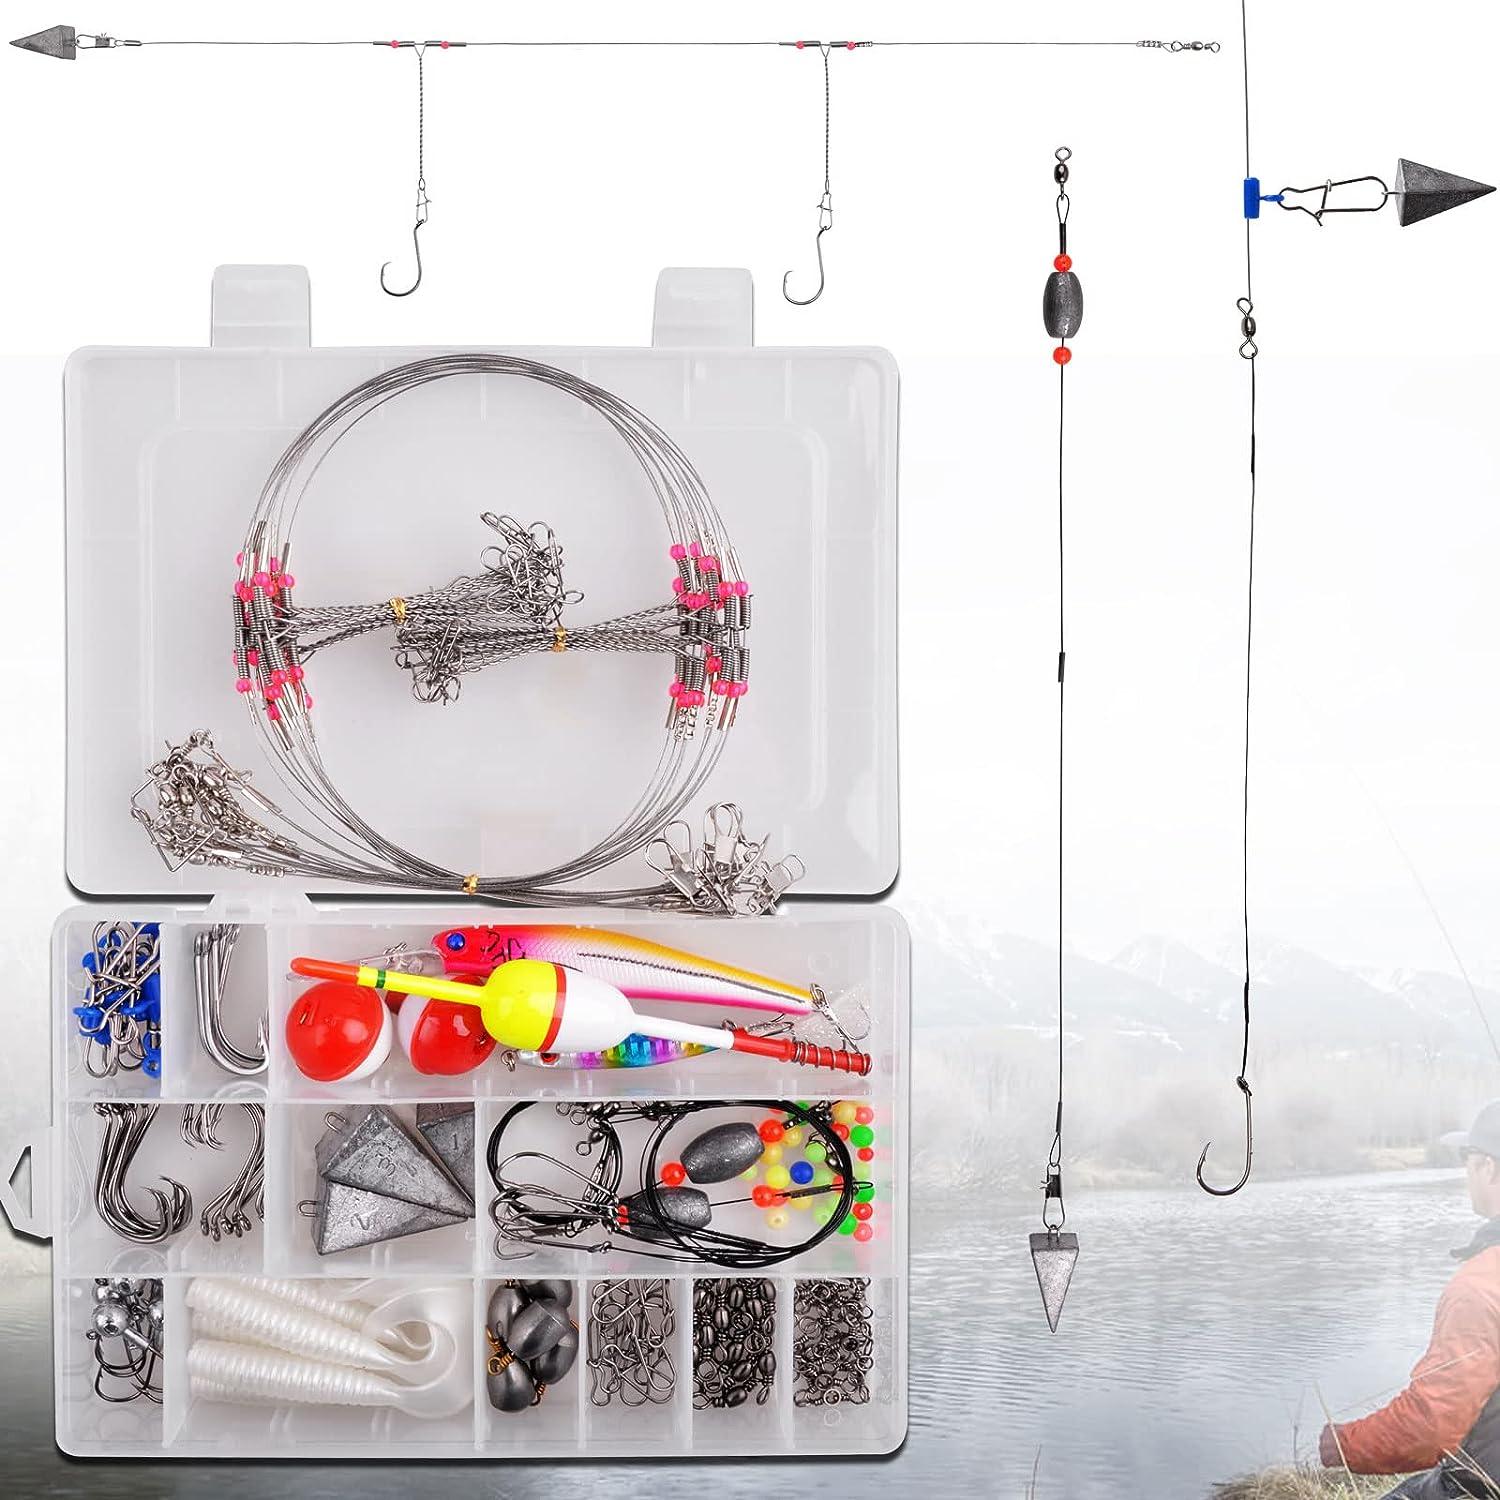 Saltwater Fishing Surf Fishing Rigs Tackle Kit - 138pcs Include